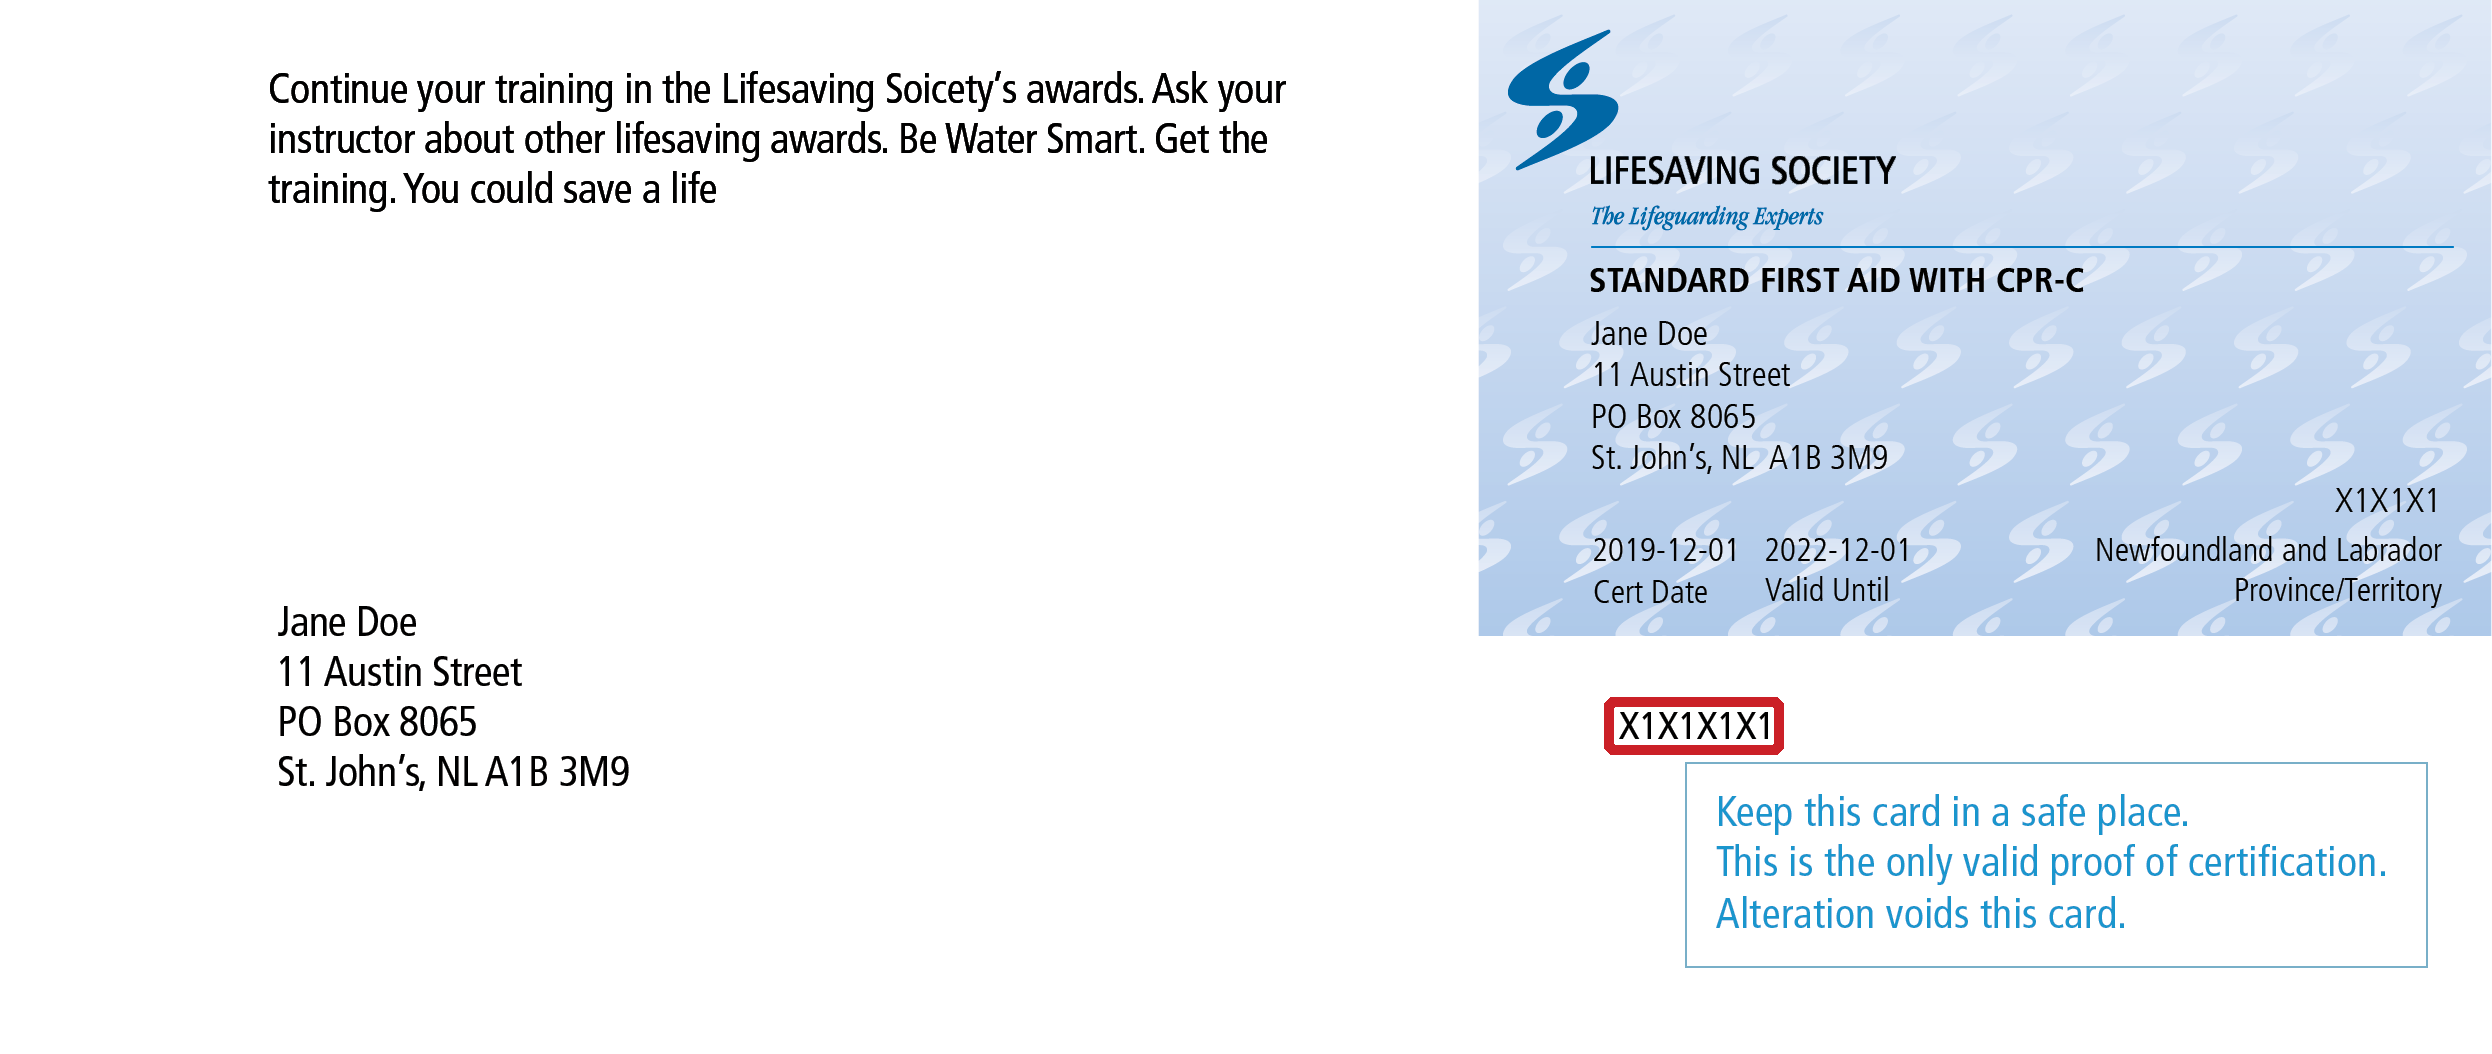 A picture of a Lifesaving Society certification card with an intact tear-away sheet that has the Web Access Code highlighted.